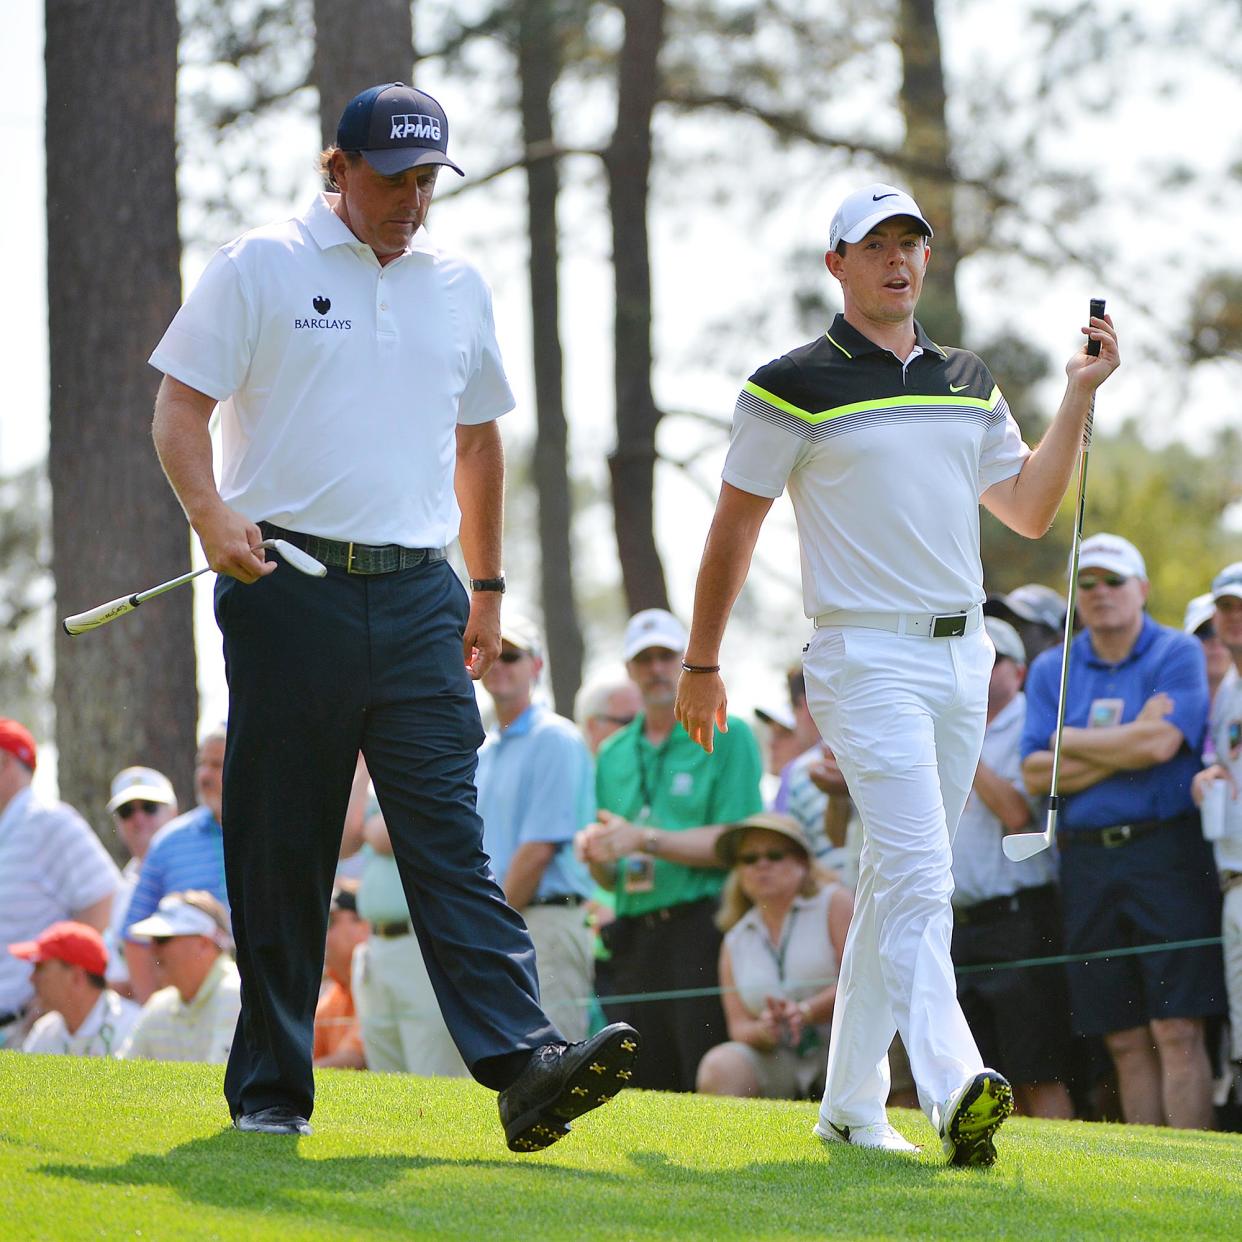 Rory McIlroy Shades Fellow Golfer Phil Mickelson Over Gambling Allegations